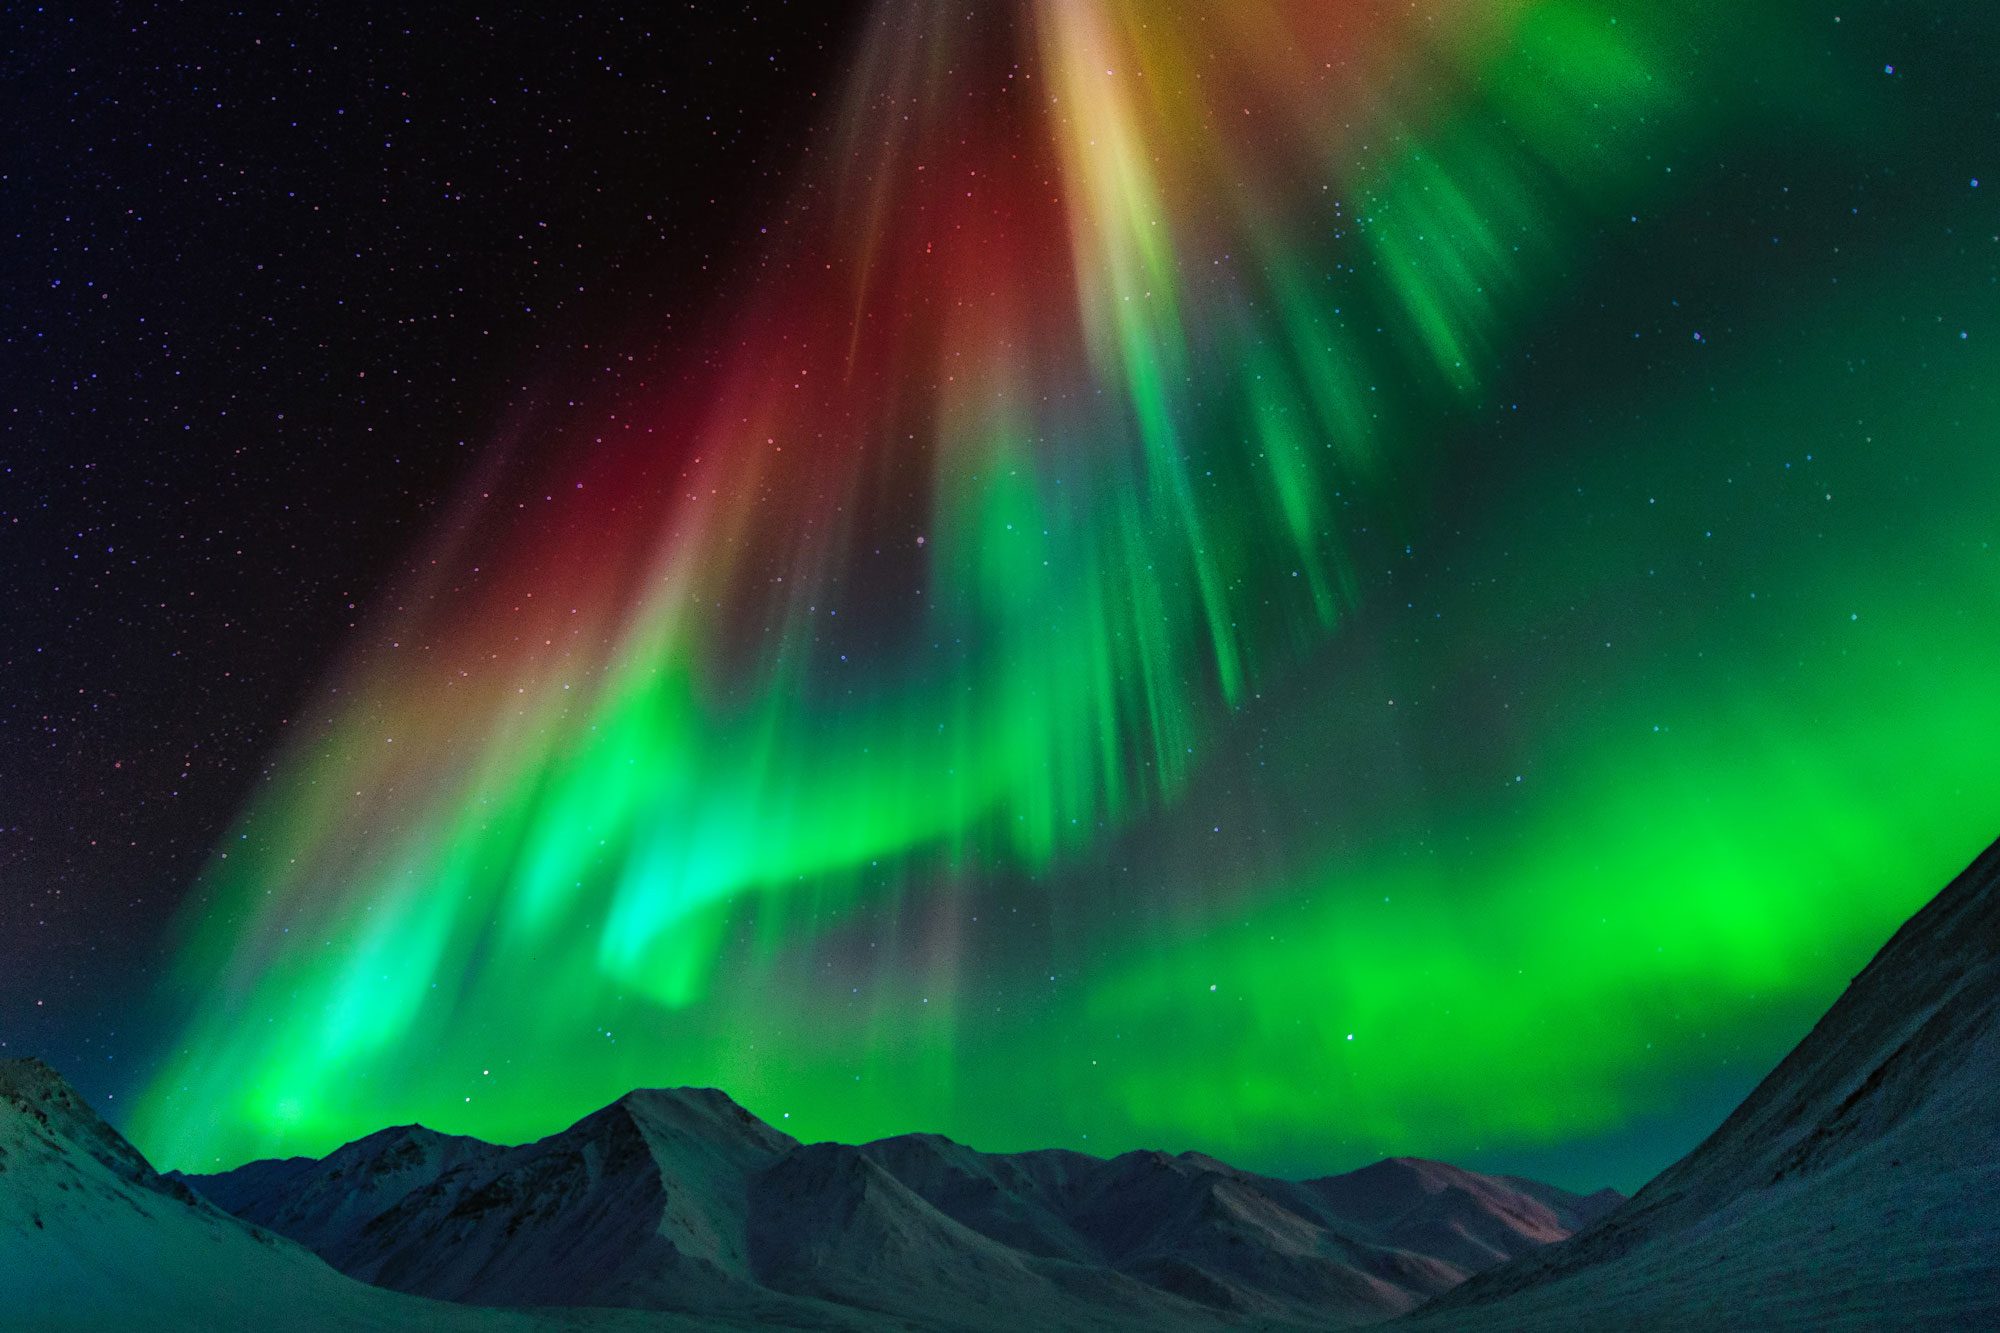 Where to See Northern Lights: 8 Best Spots for Aurora Borealis Viewing